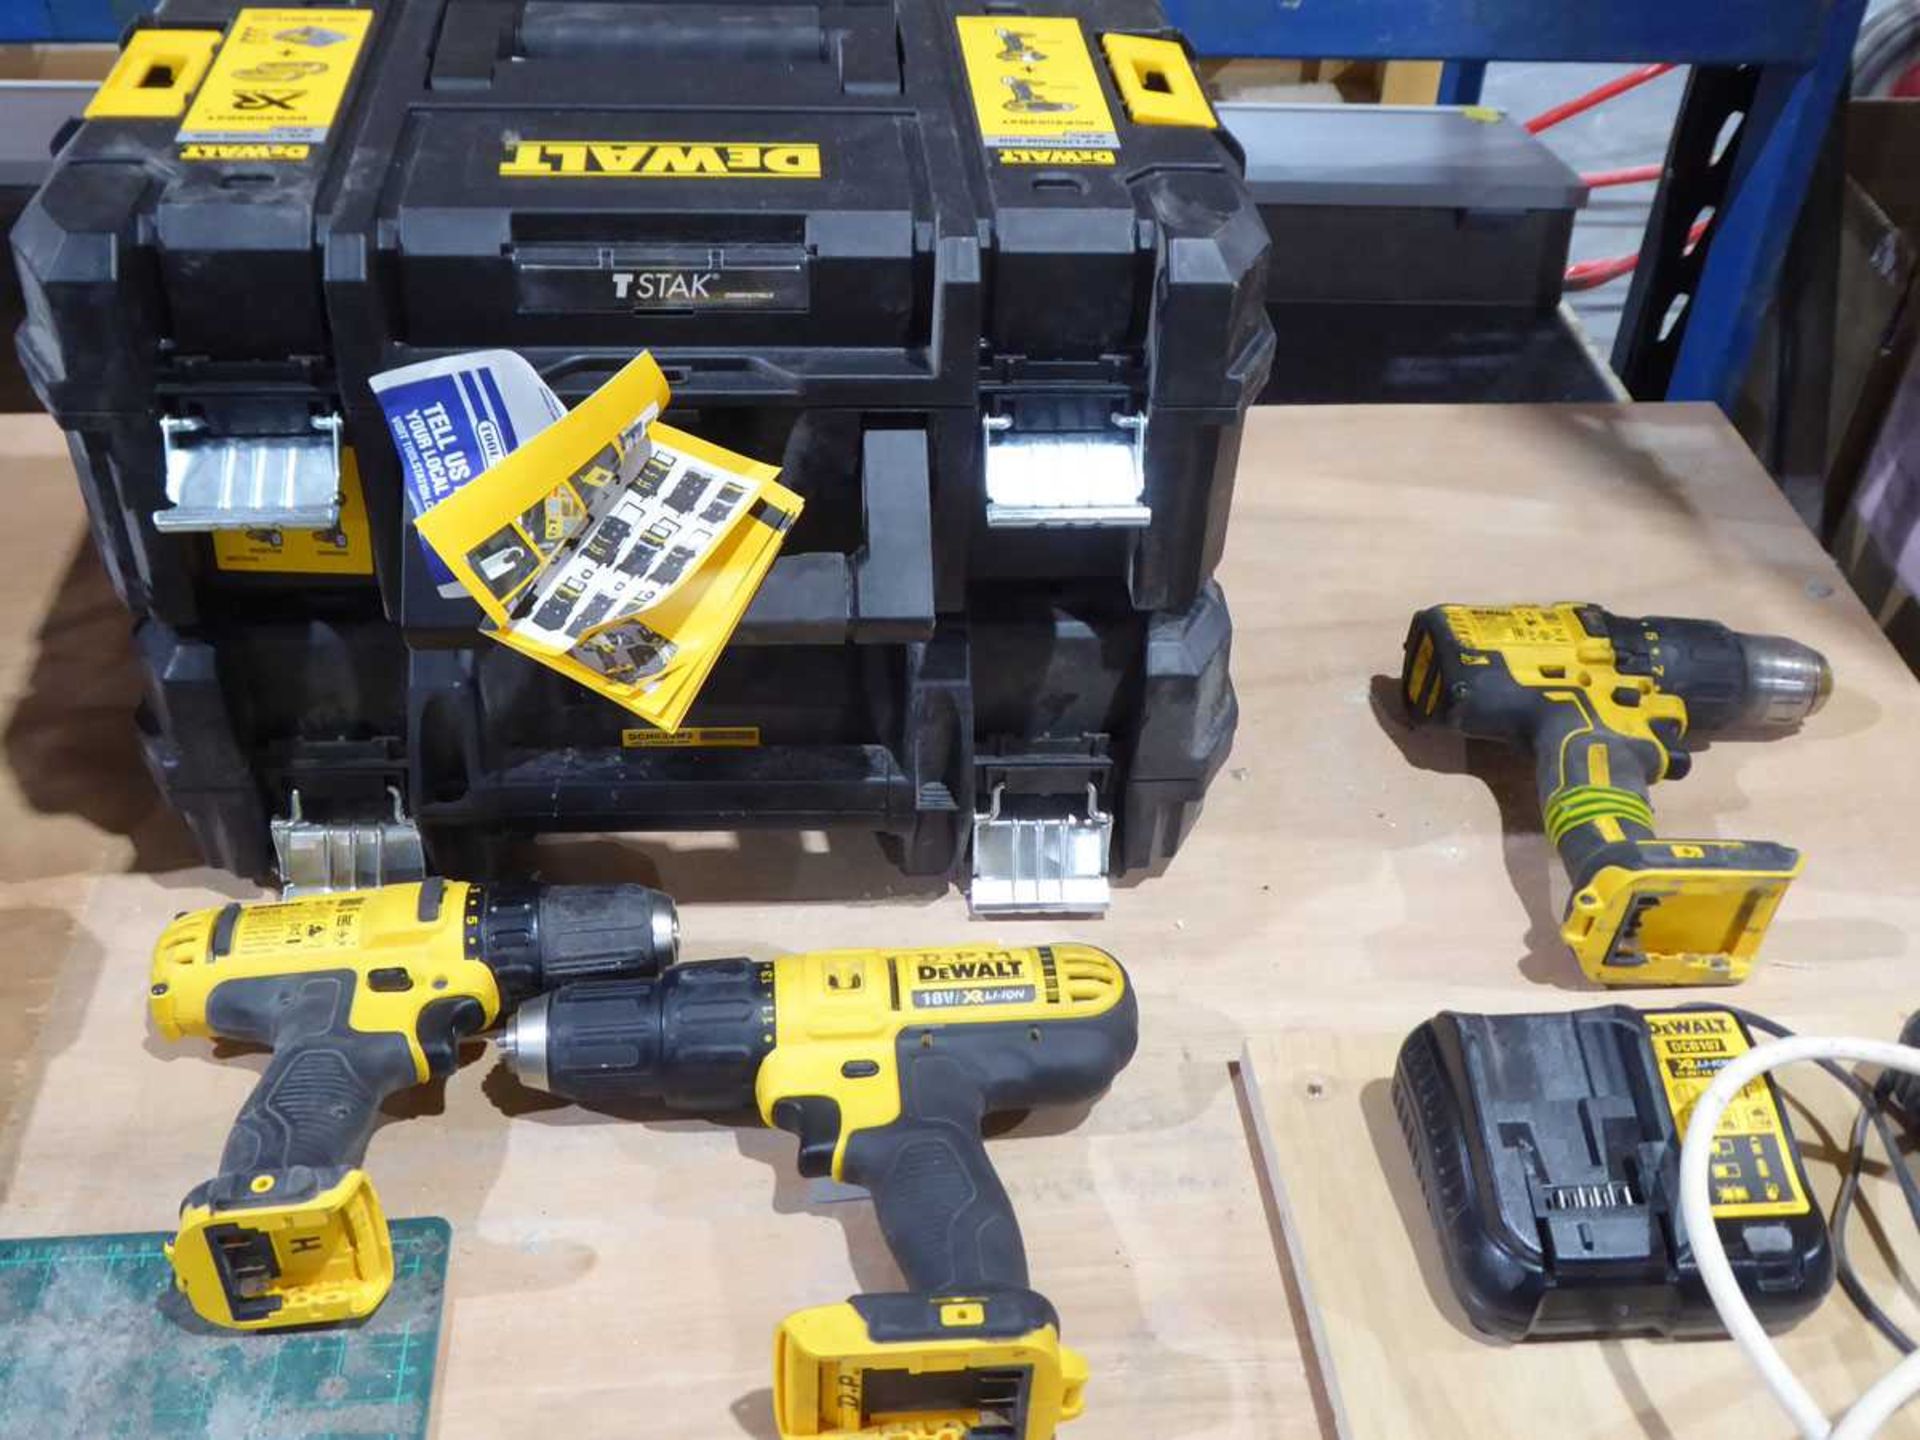 +VAT 3 x DeWalt cordless drill drivers together with 2 x cases and a re-charging station